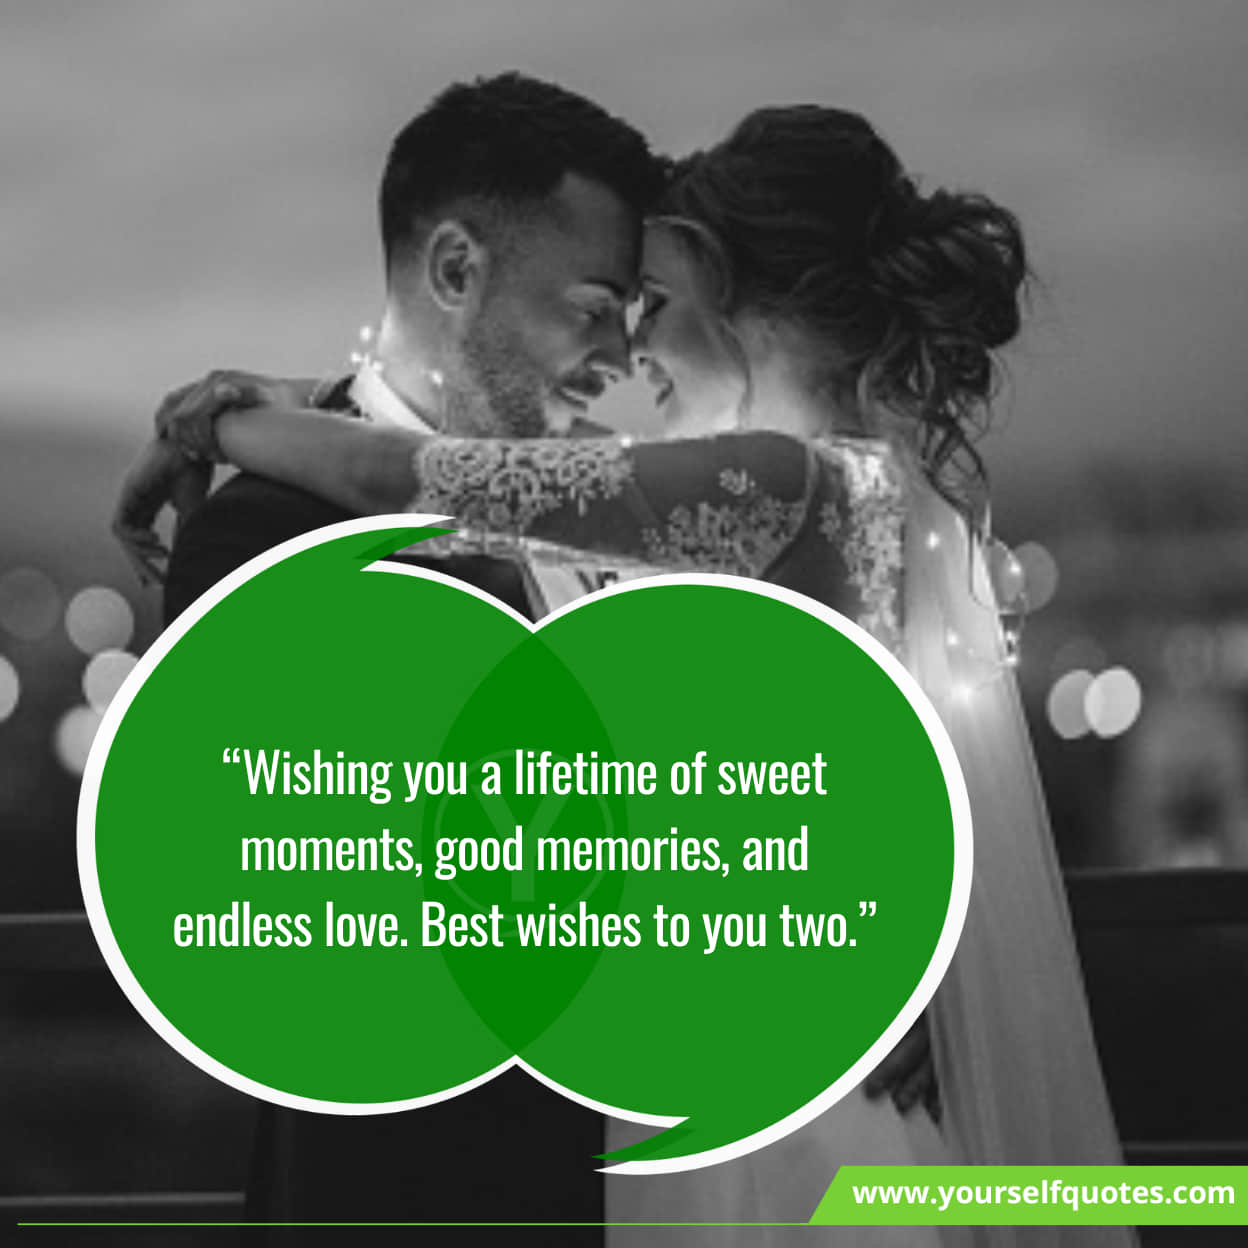 Heart Warming Wedding Quotes Wishes